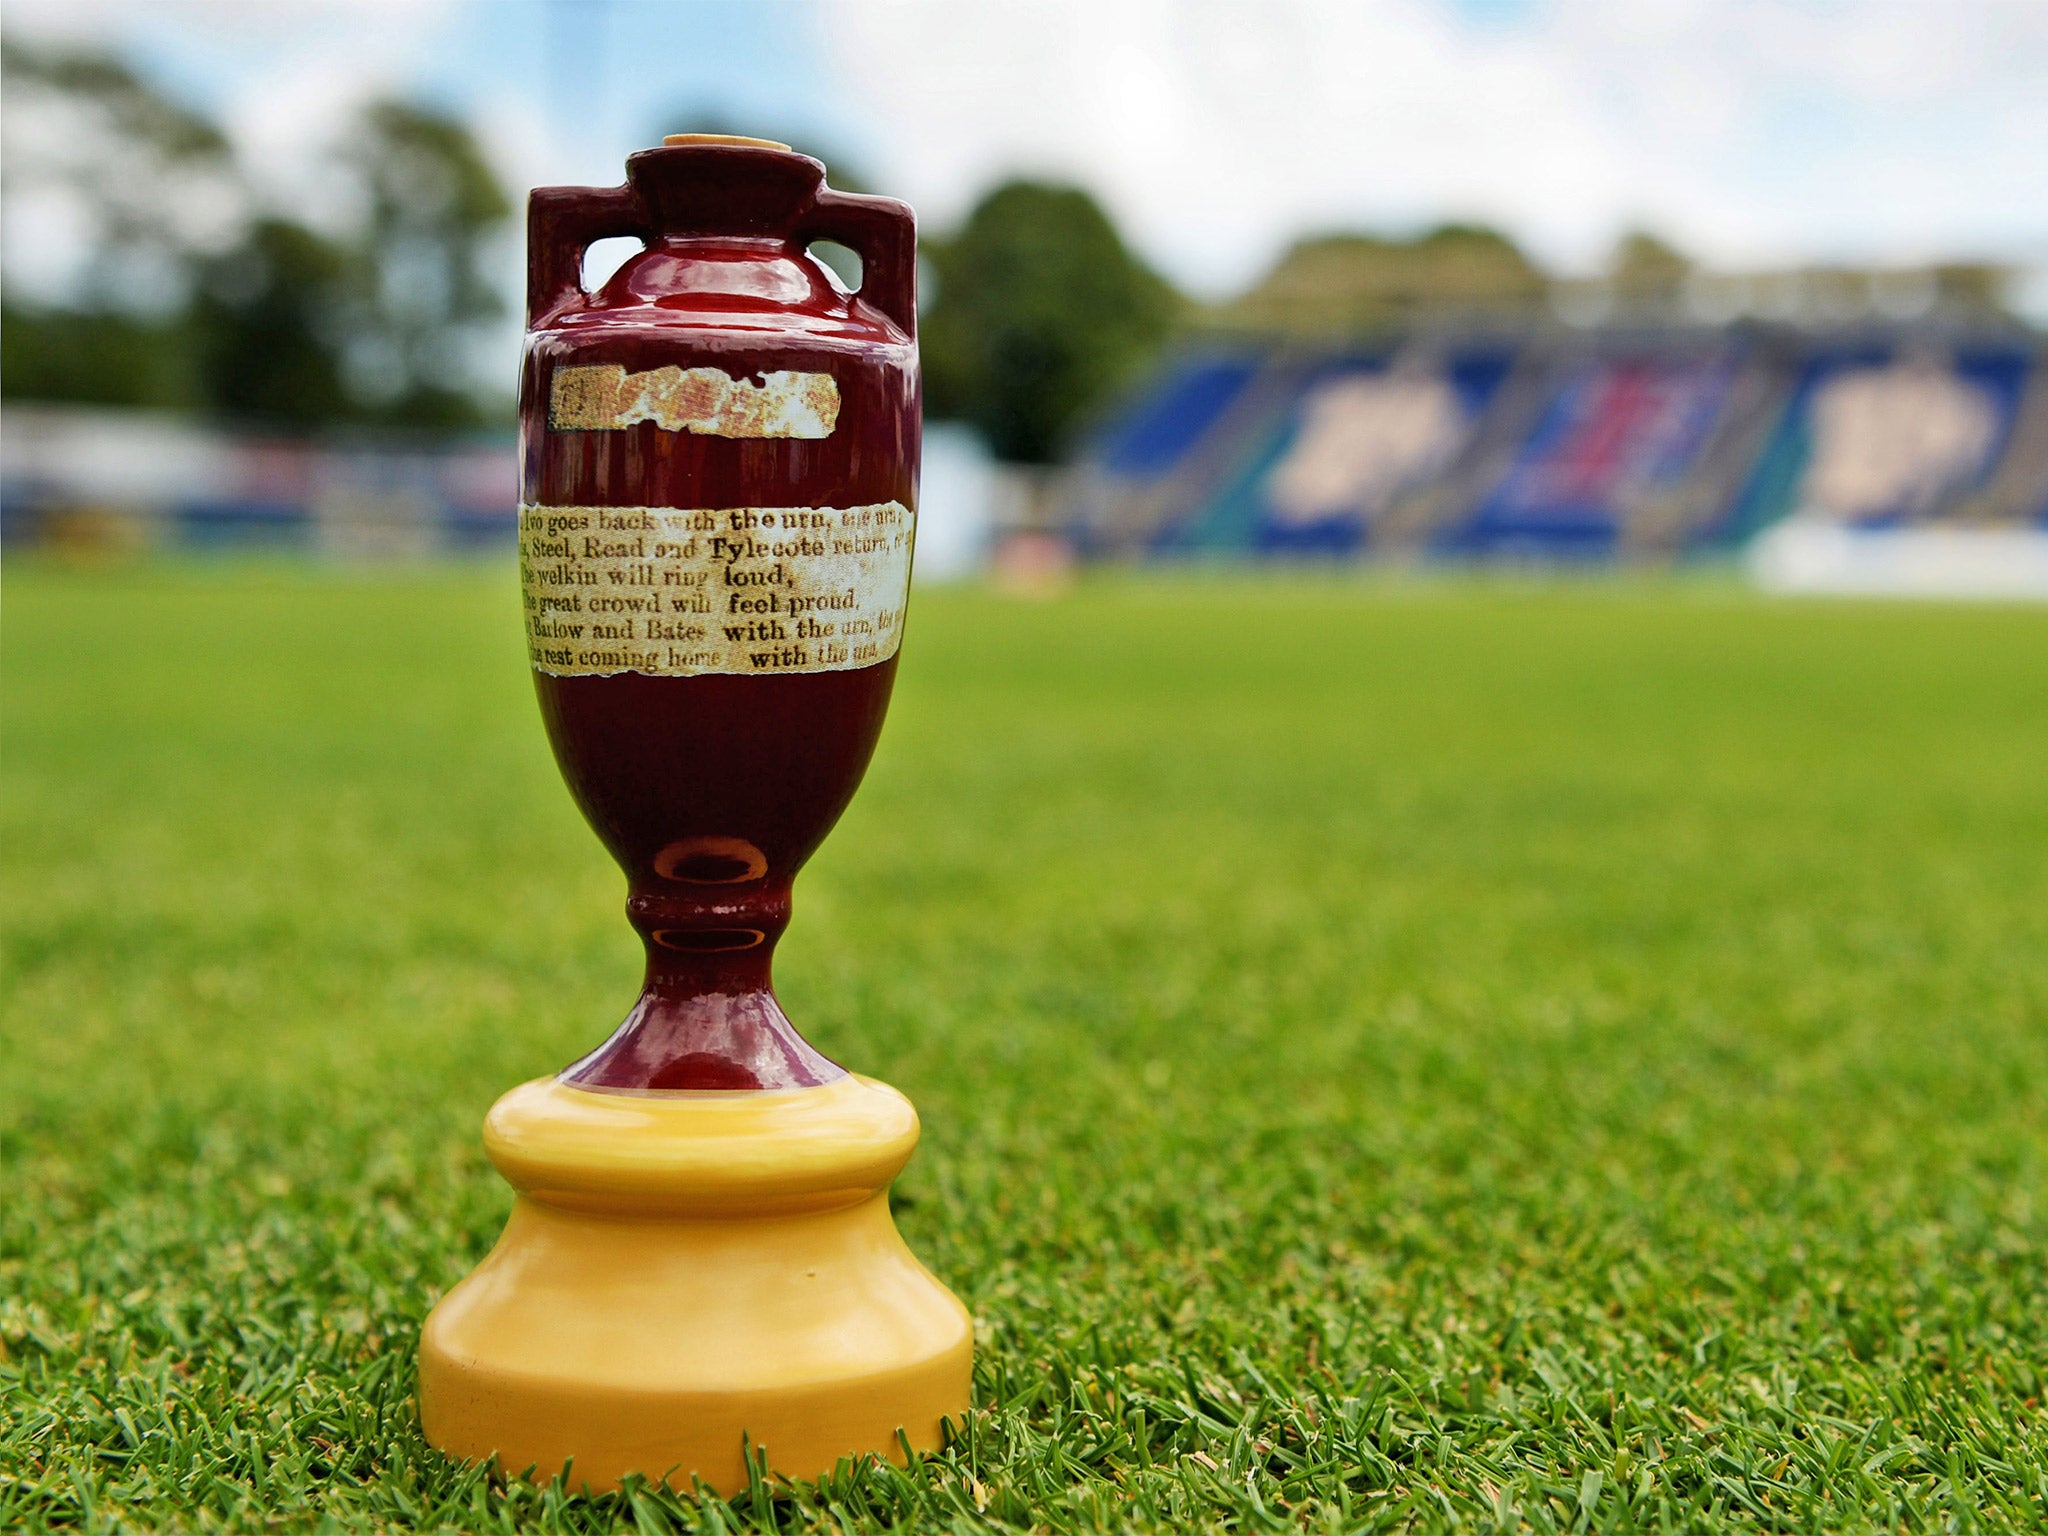 A replica urn sits on the turf at Swalec Stadium in Cardiff, ahead of the first Ashes Test match